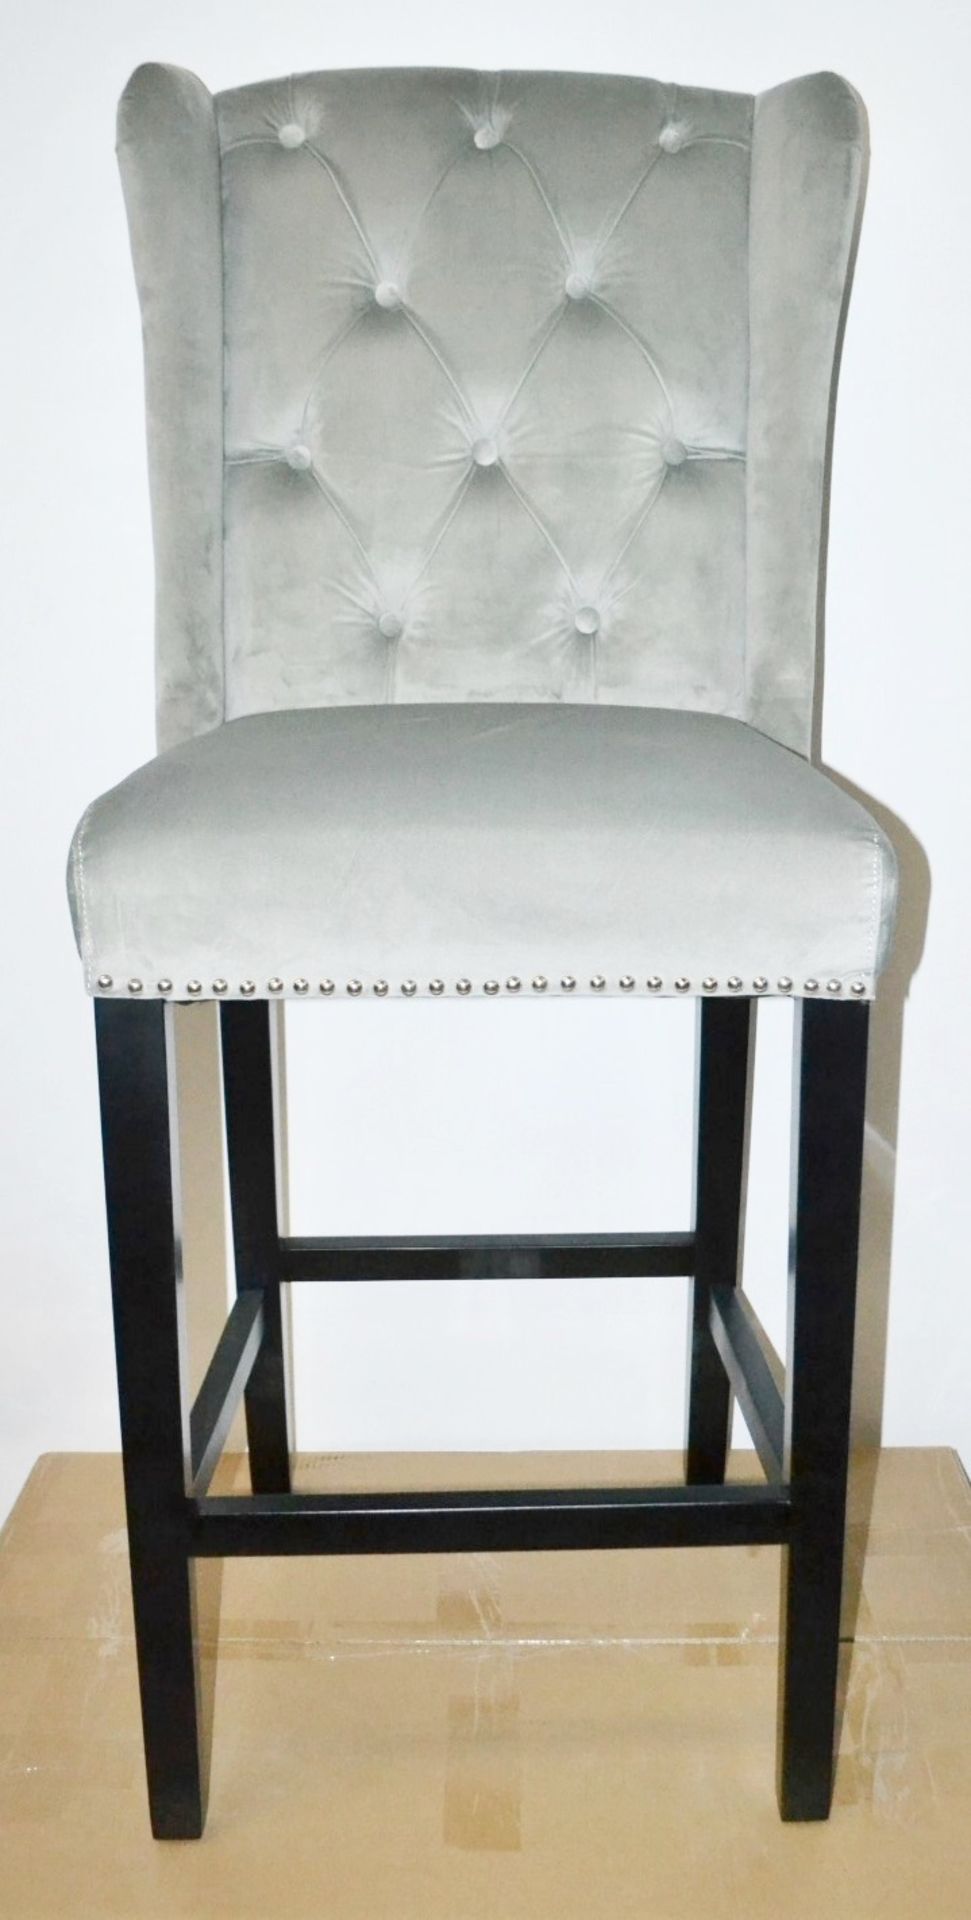 4 x HOUSE OF SPARKLES Luxury Wing Back Bar Stools In A Silver Velvet With BLACK Legs - Image 4 of 8